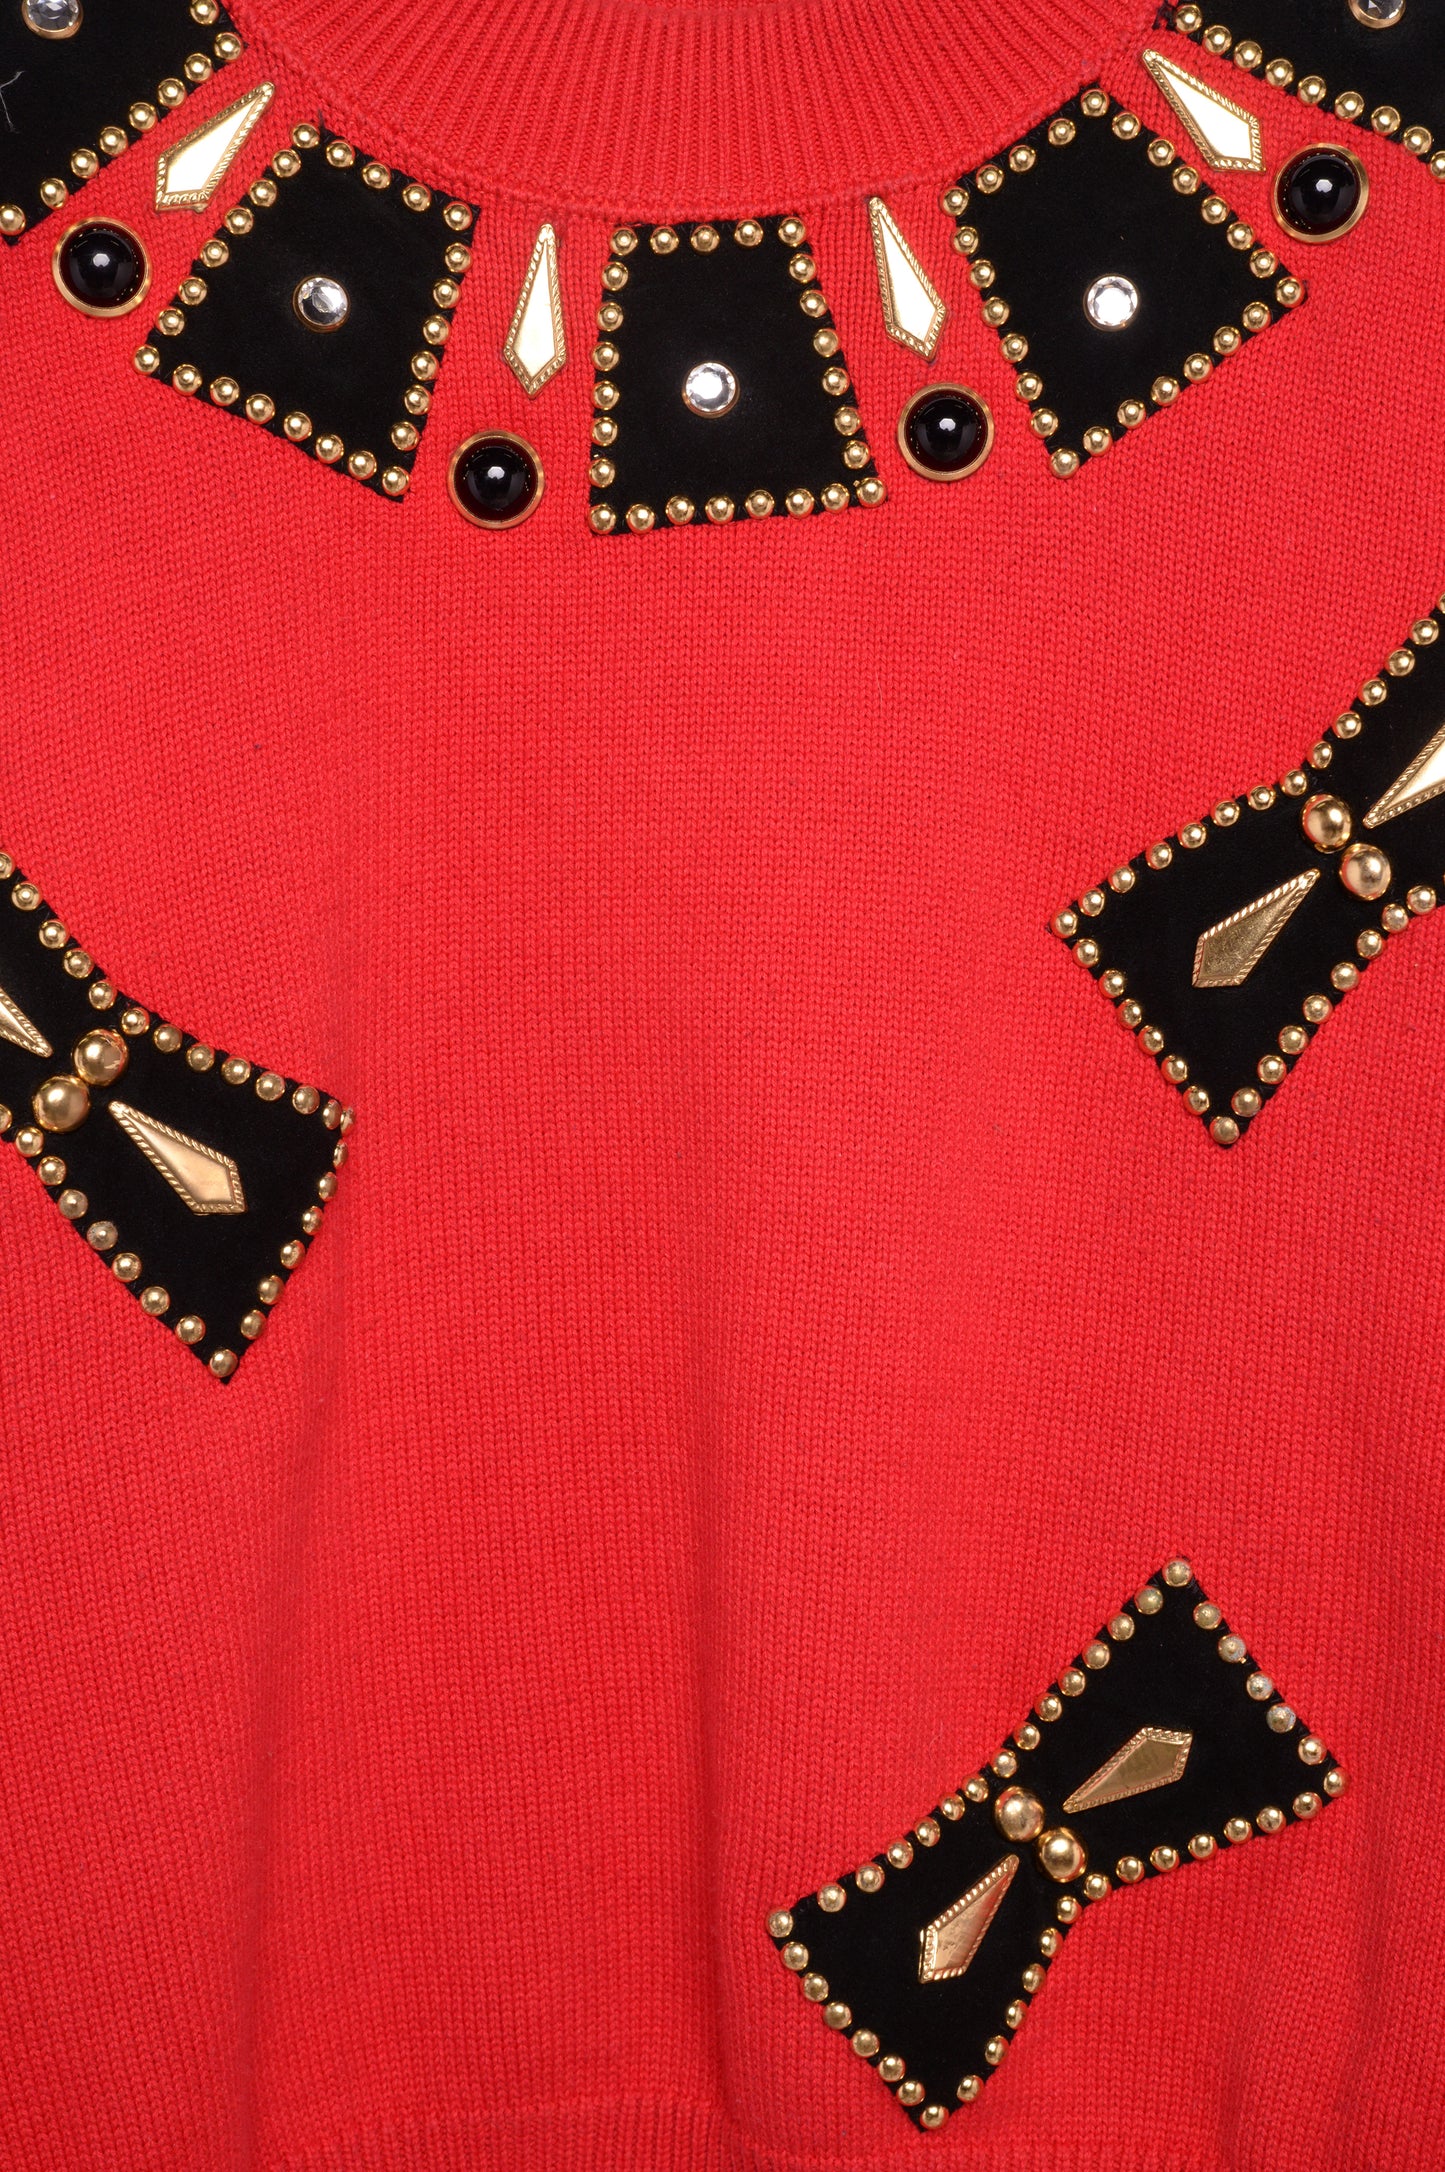 Beaded Shapes Sweater